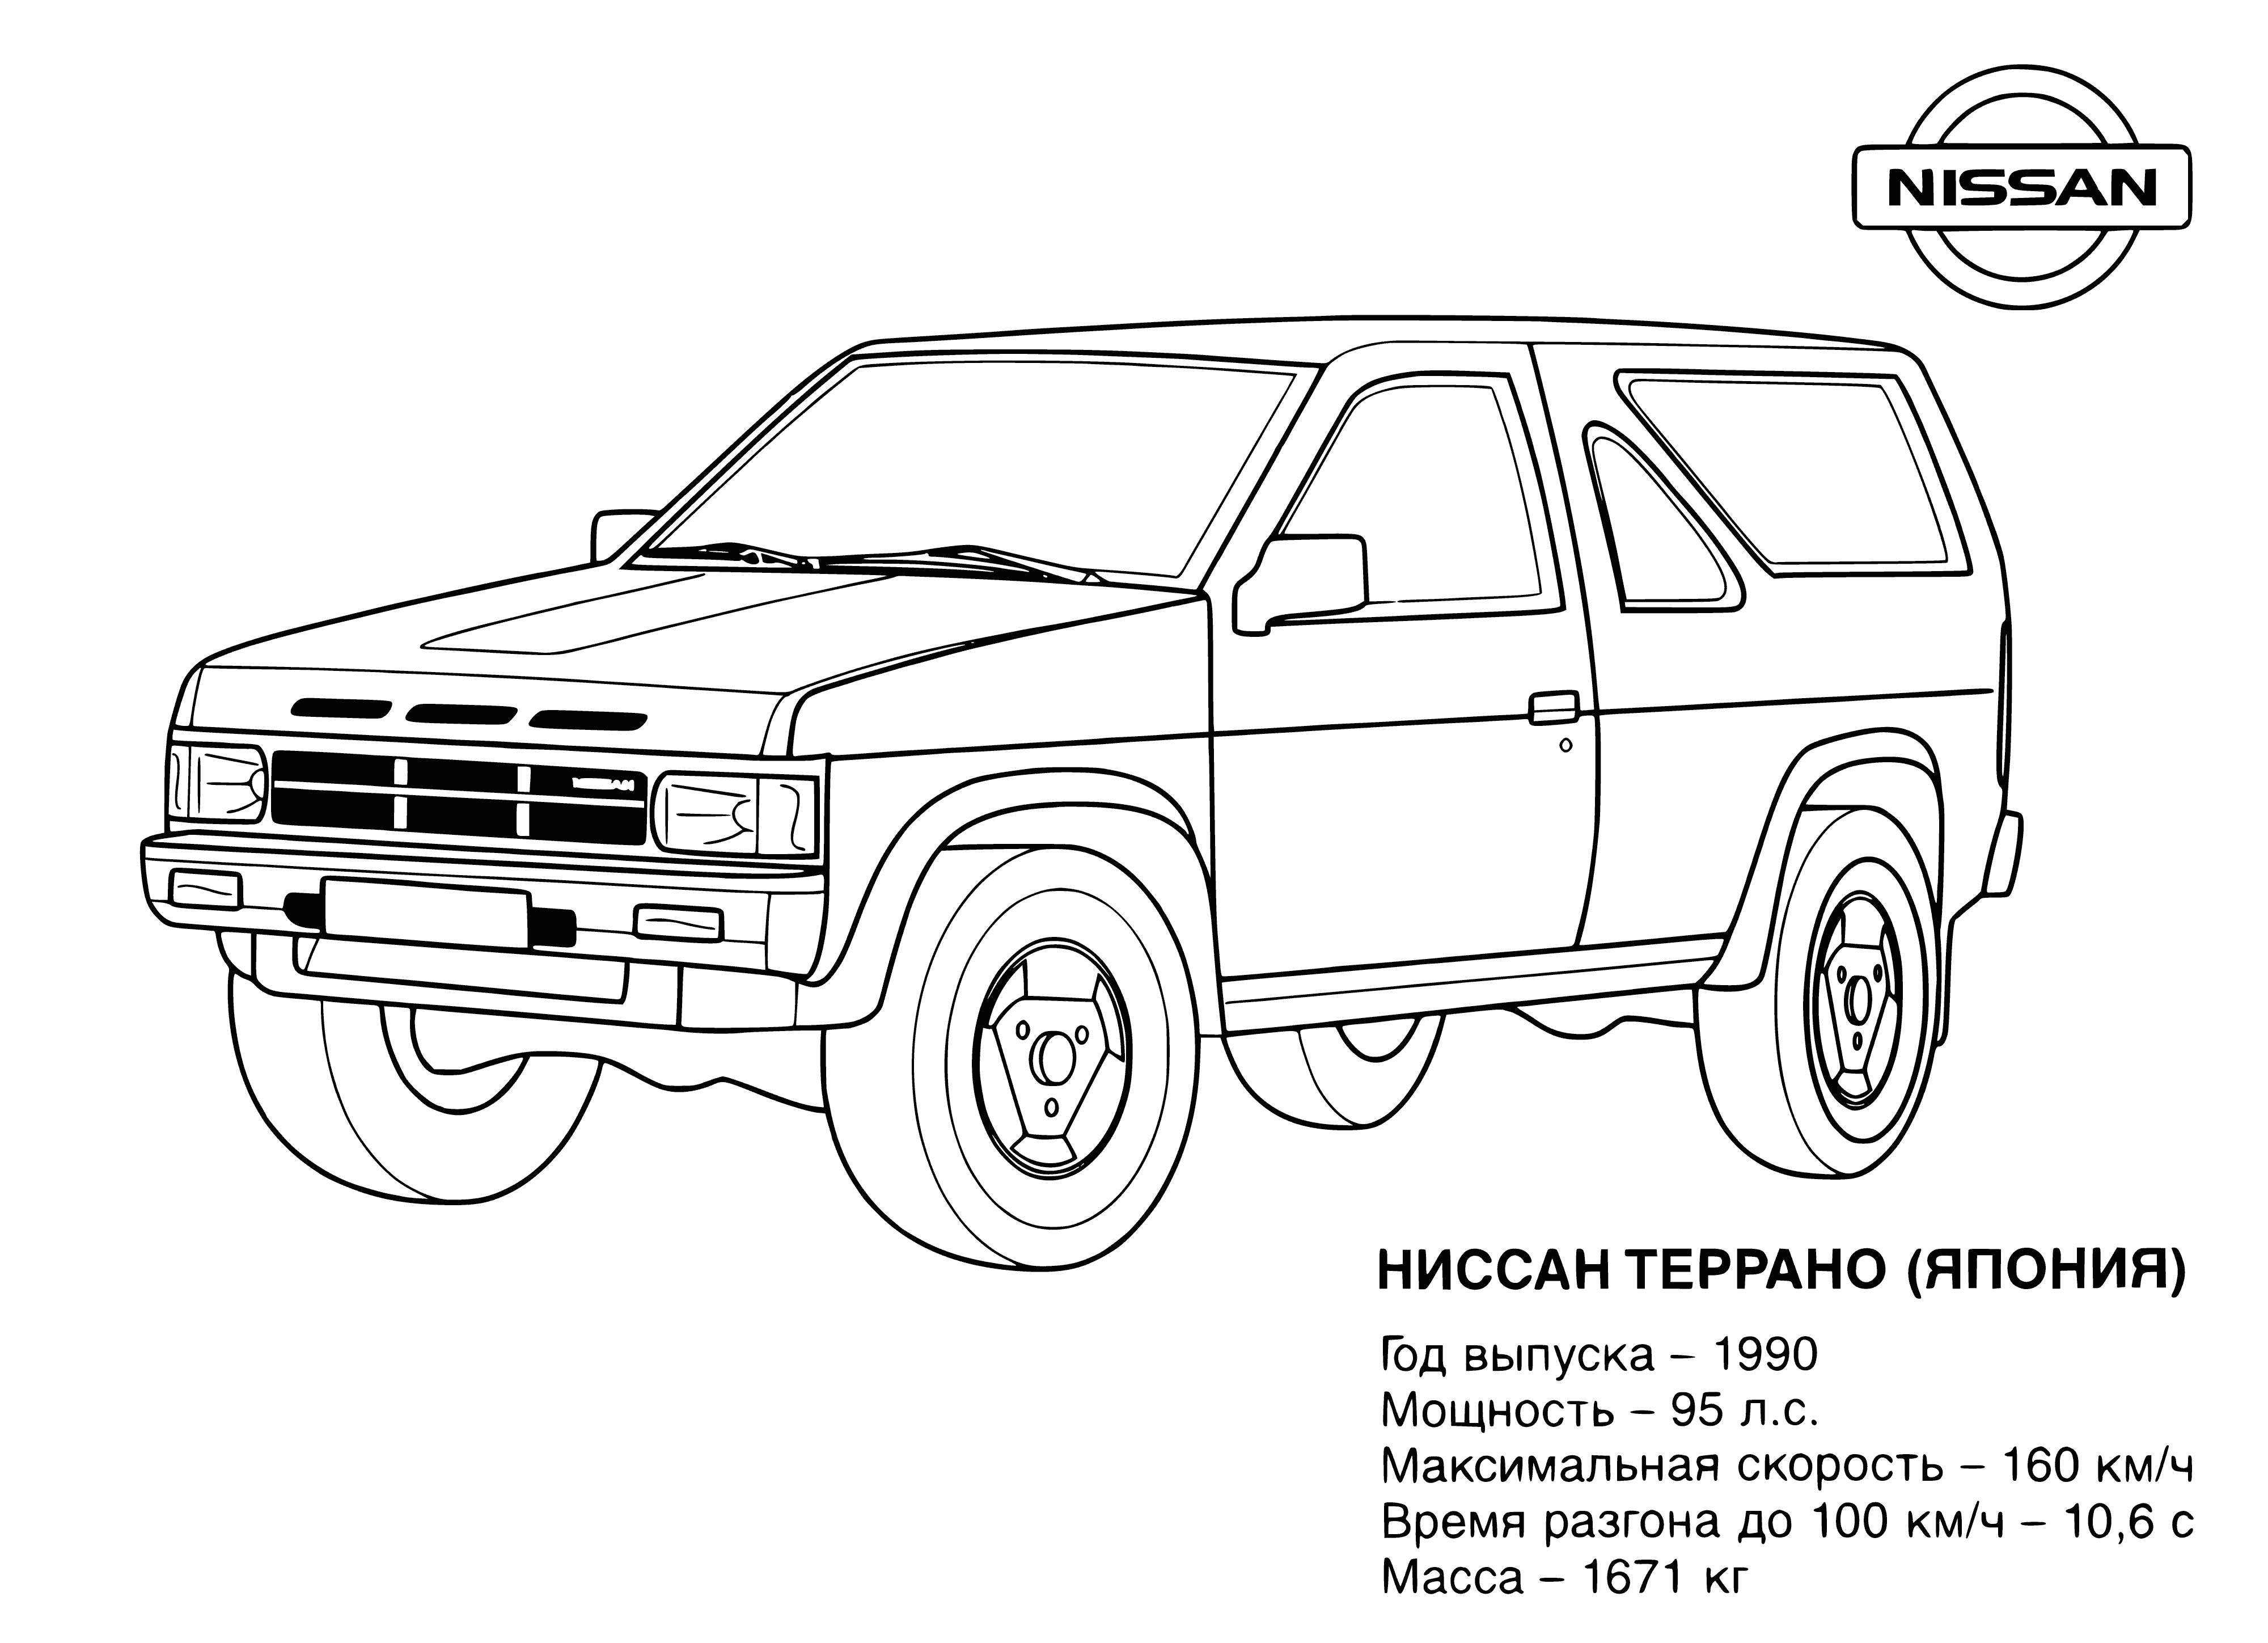 Nissan (Japan) coloring page